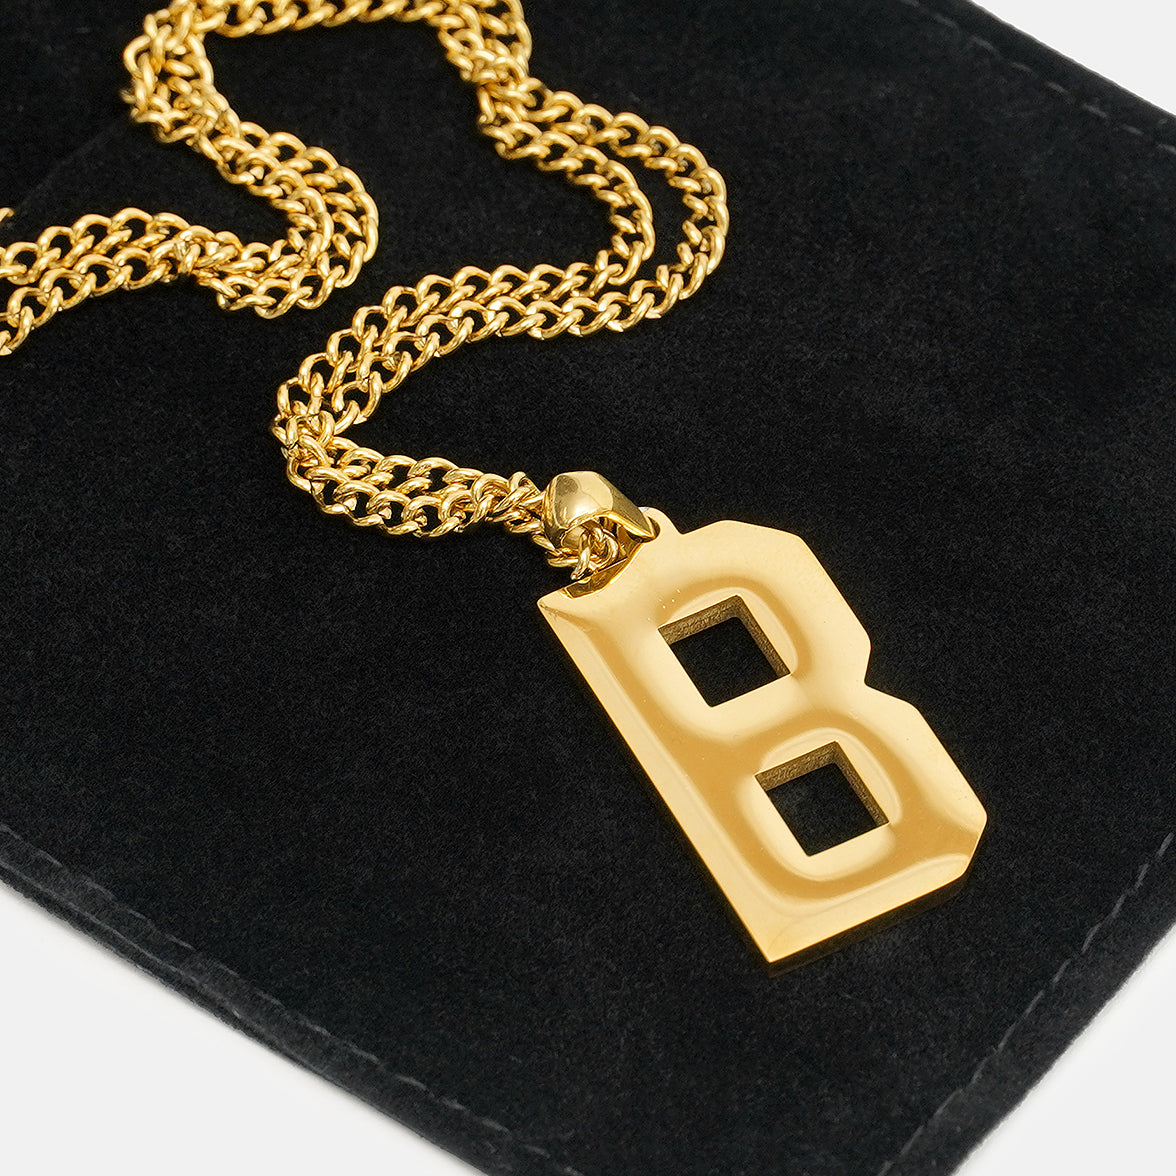 B Letter Pendant with Chain Necklace - Gold Plated Stainless Steel